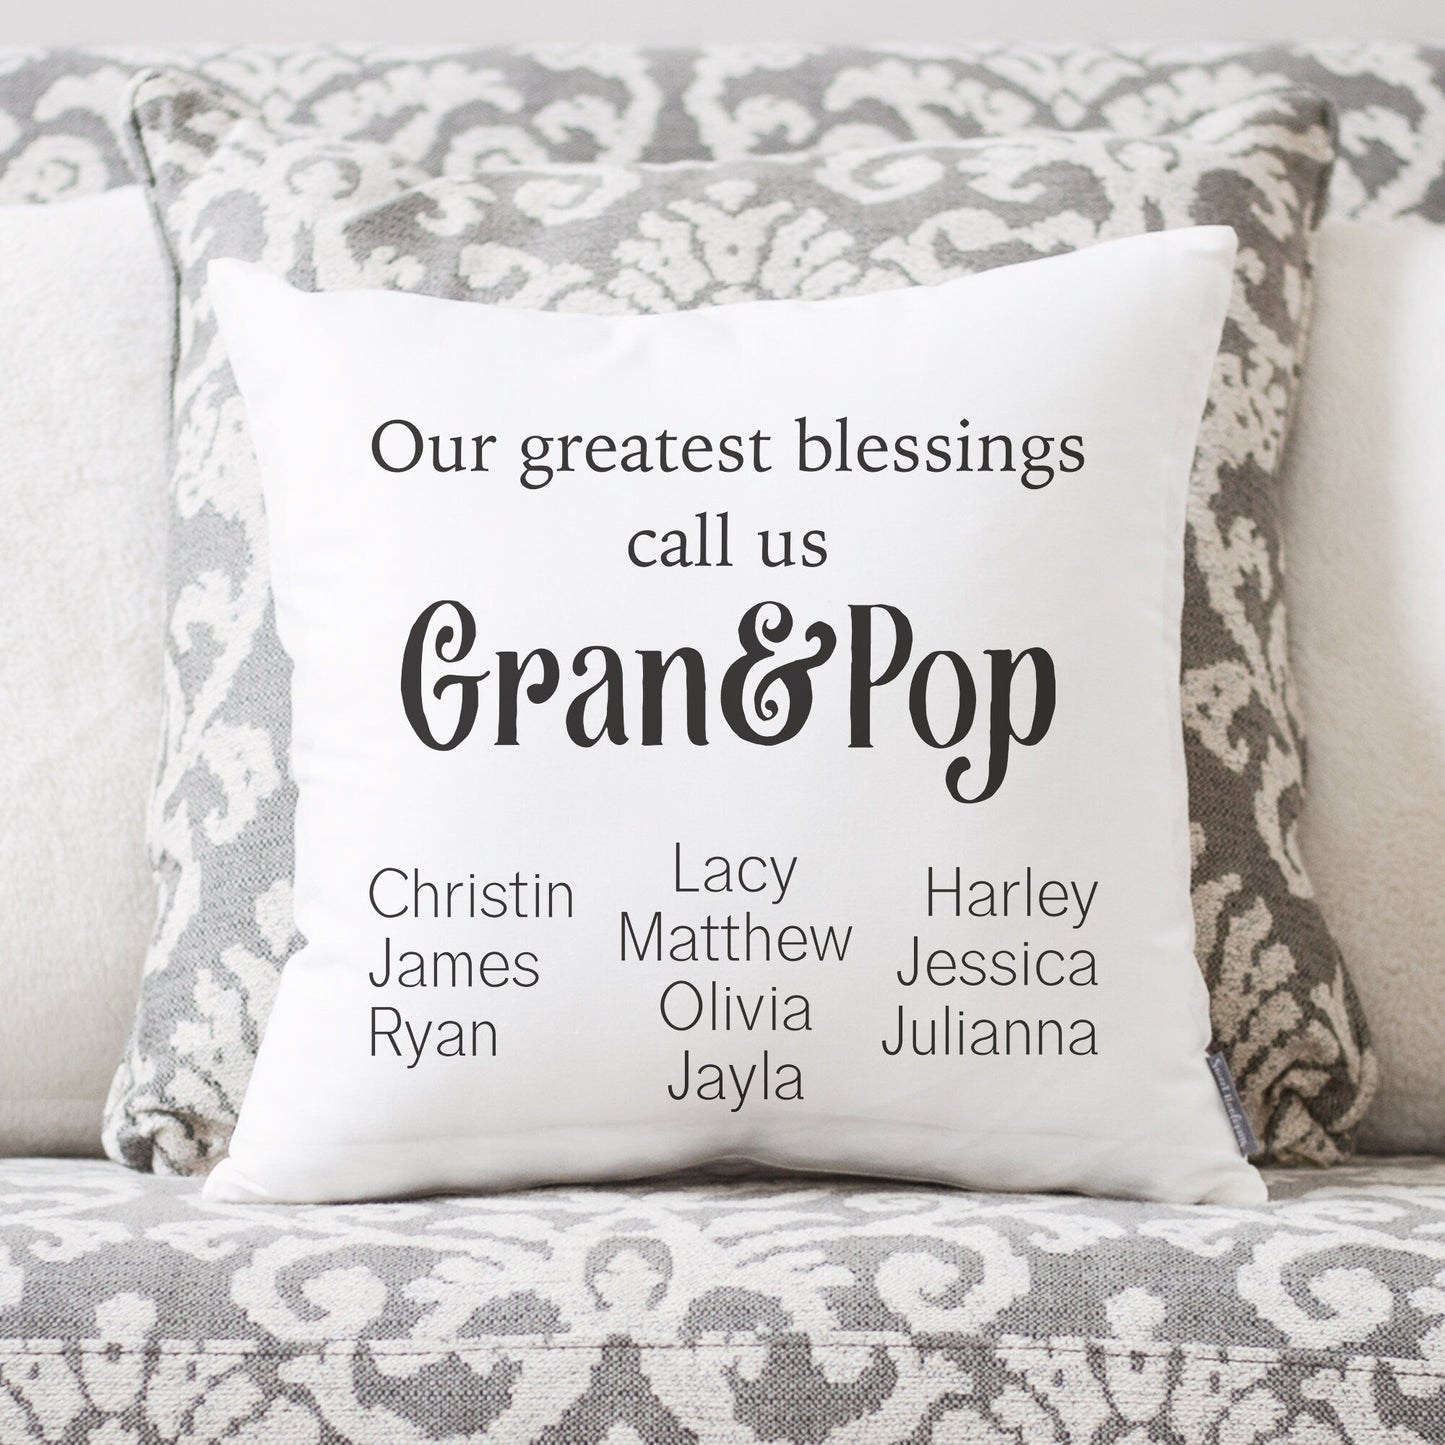 Load image into Gallery viewer, Our Greatest Blessings Call Us | Grandparent Gift | Personalized Grandparent Names | Gift For Grandparents | Names of Grandkids | Kids Names
